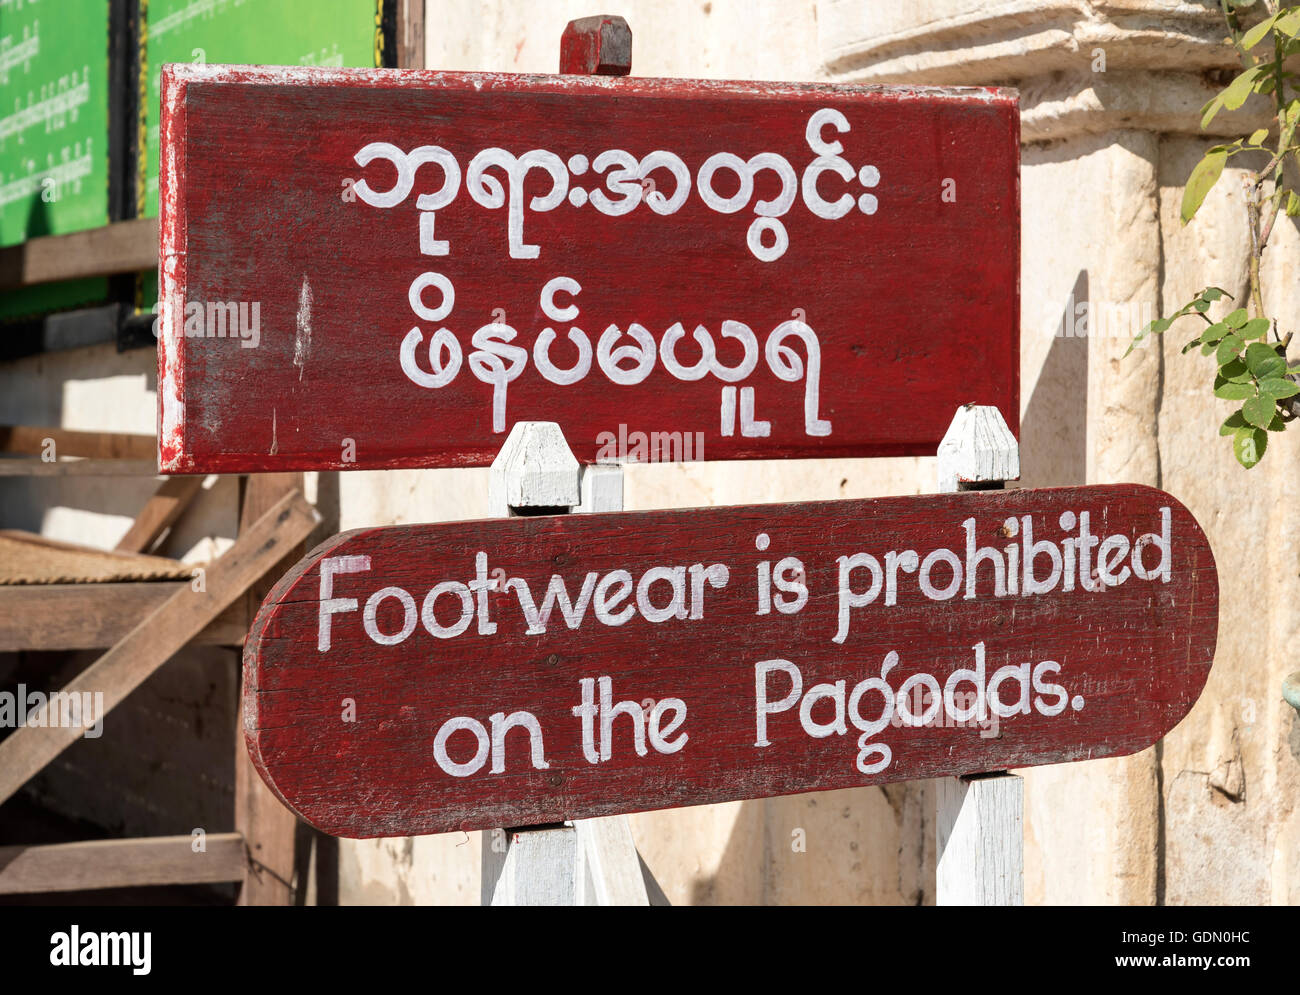 Myanmar Shoe High Resolution Stock Photography and Images - Alamy